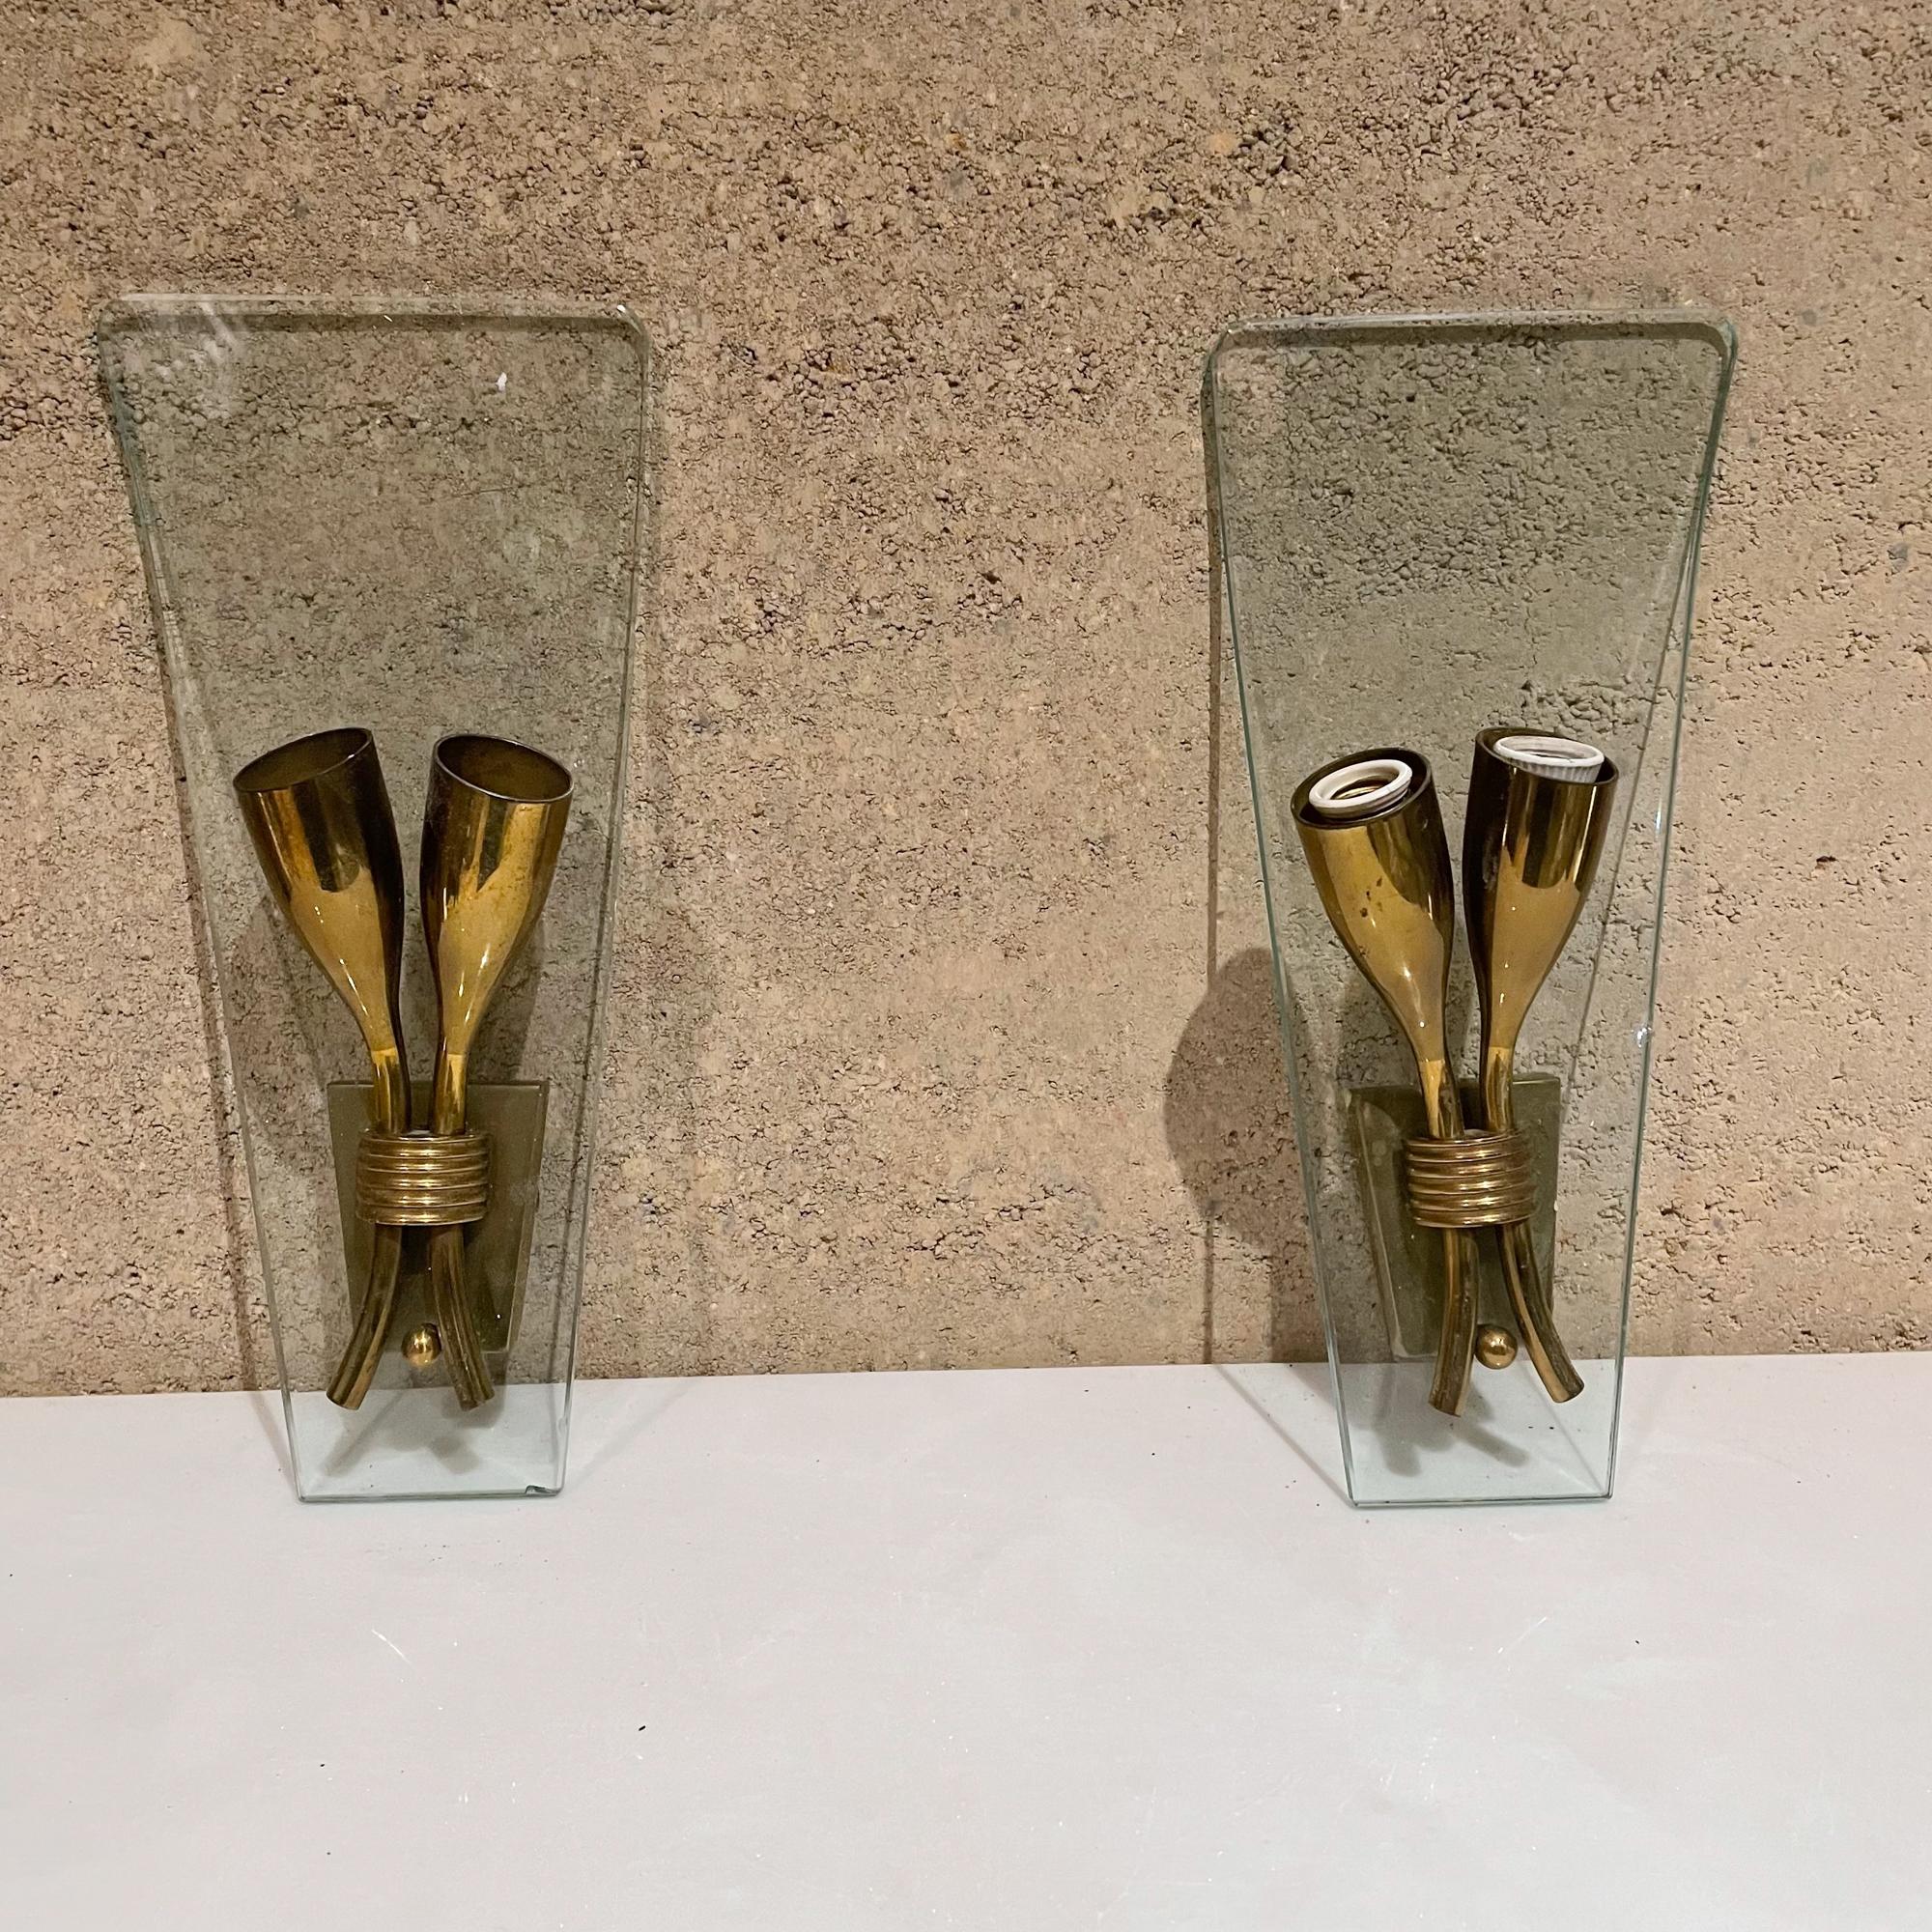 Sweet Sconces
1950s Elegance- Pair of Italian wall sconces style of Gio Ponti & max Ingrand for Fontana Arte in Italy
Wonderfully curved glass with brass body.
Measures: 10 .75 H x 4.63 W x 2 .5 D inches
Original vintage unrestored condition